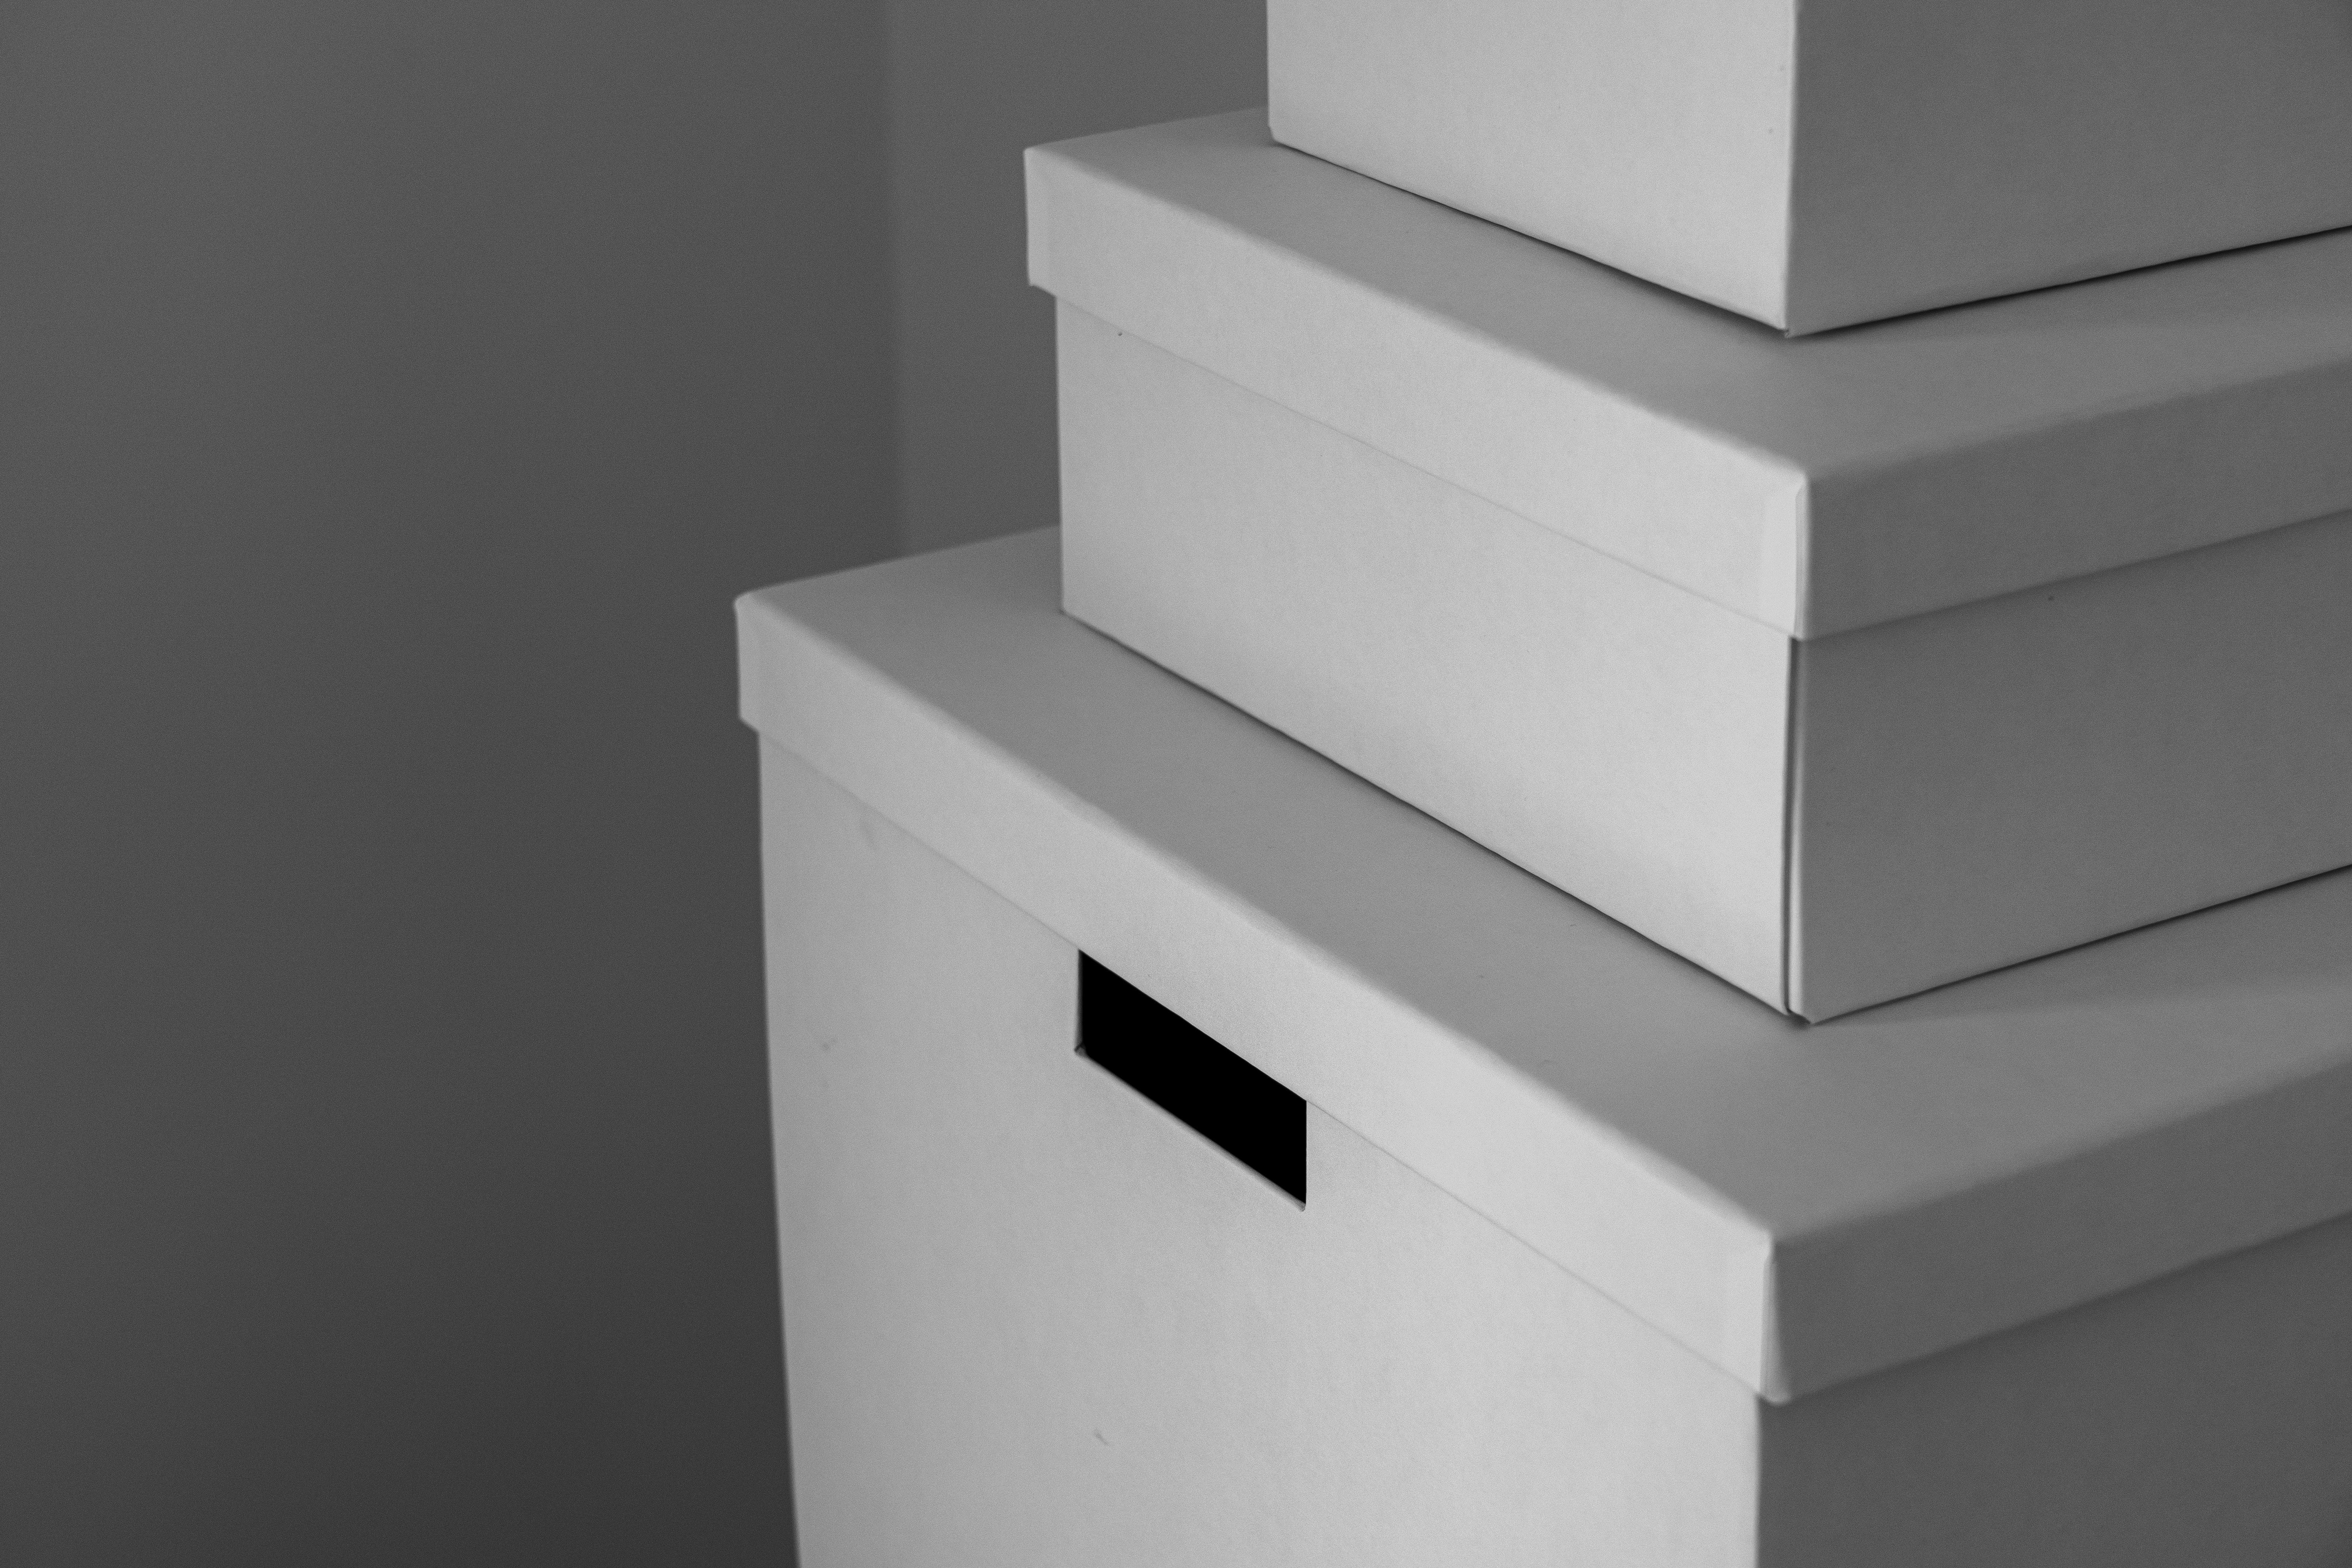 Photo of boxes stacked against each other